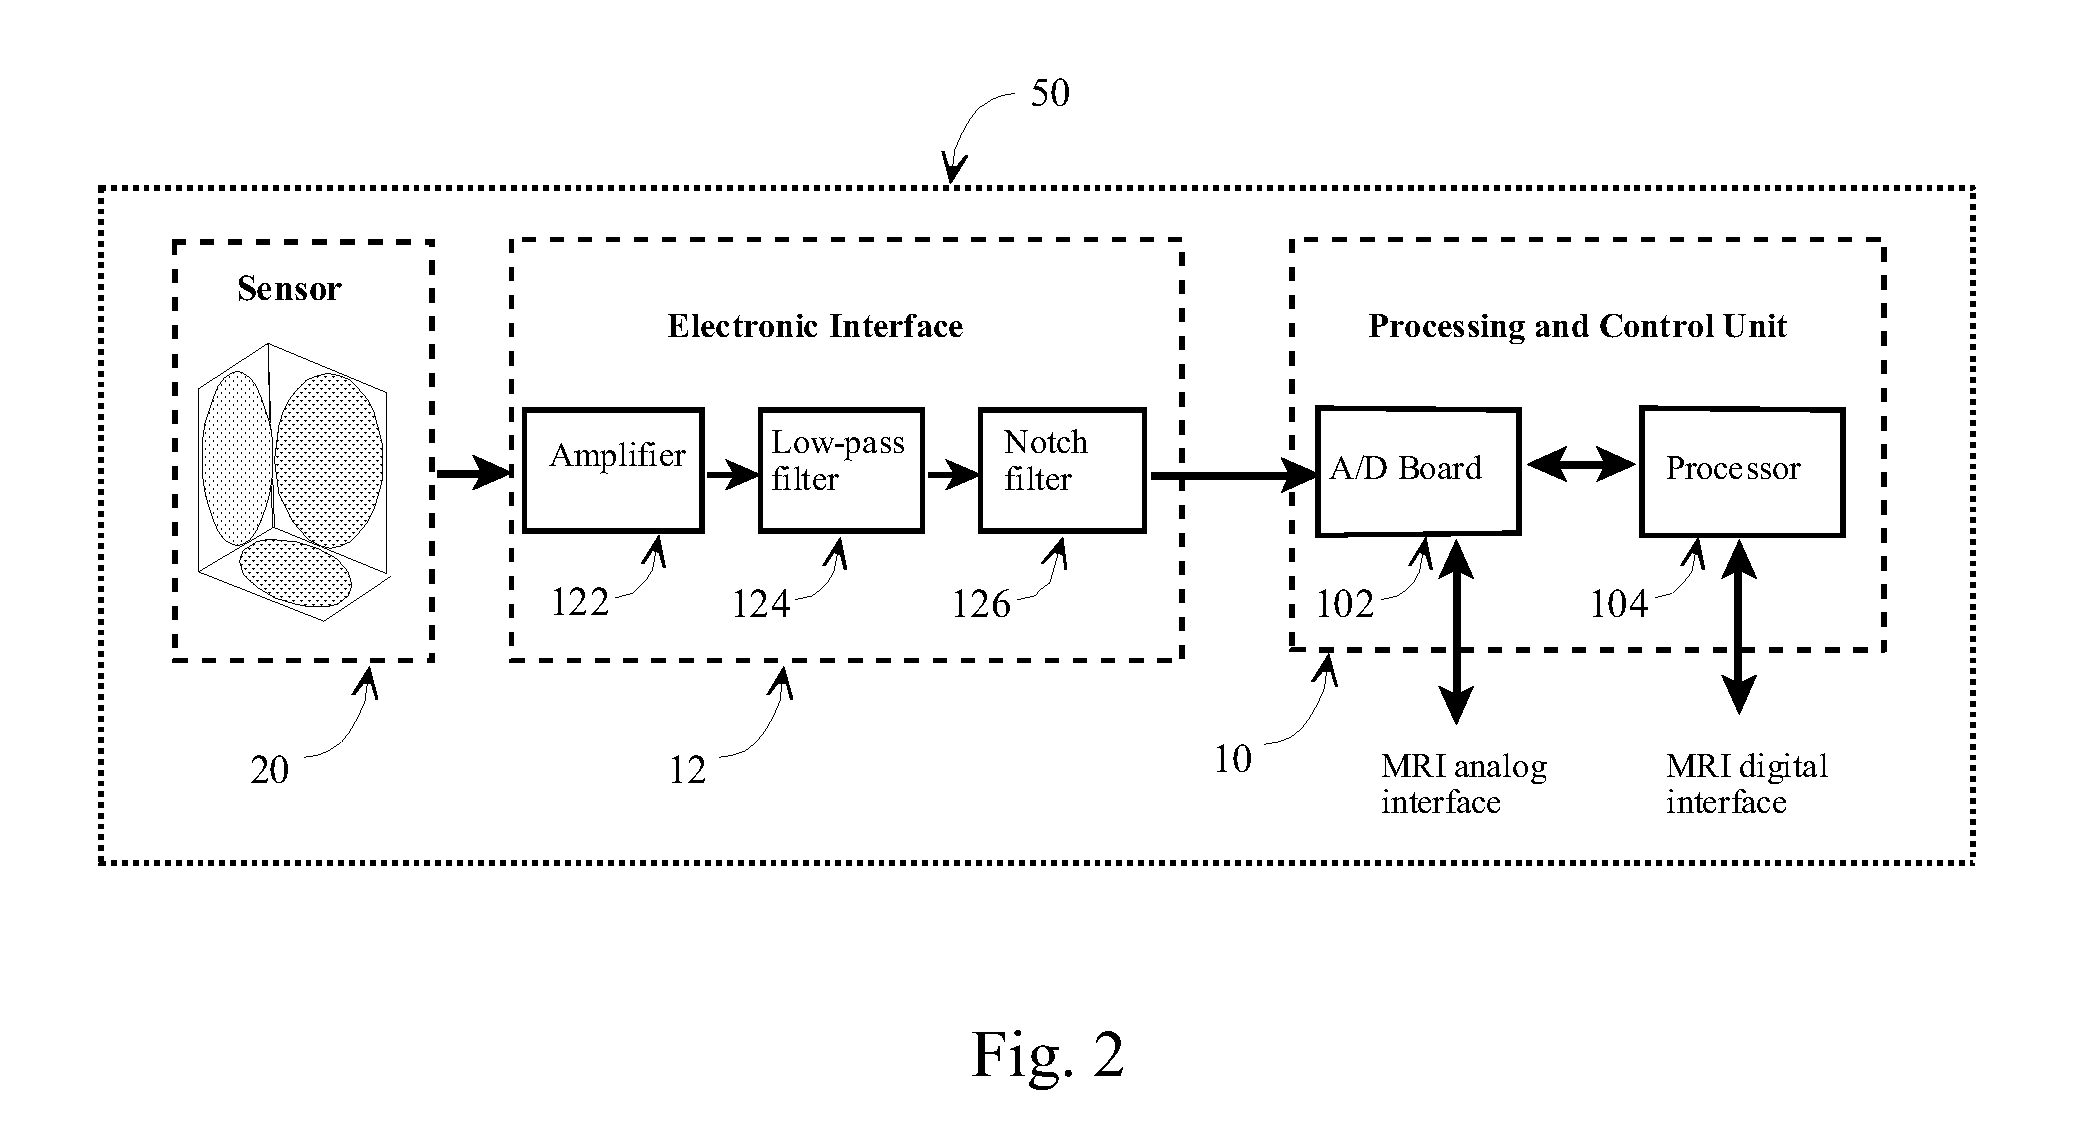 Method and apparatus to estimate location and orientation of objects during magnetic resonance imaging